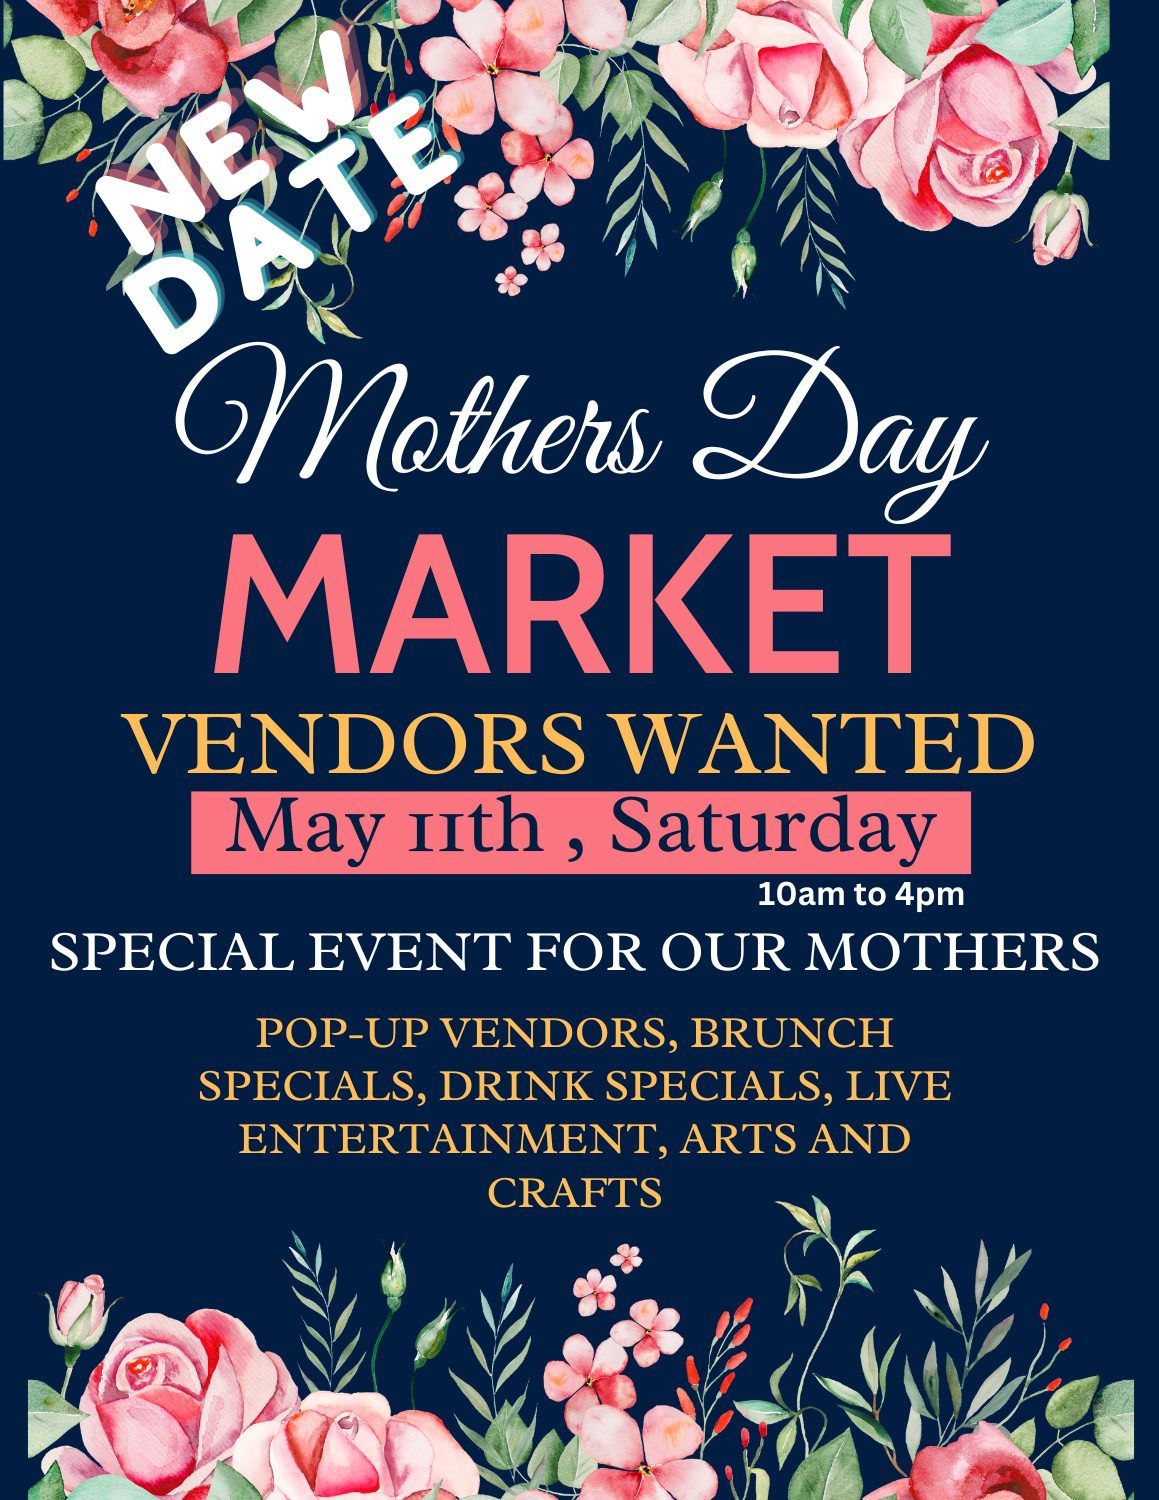 Mothers Day Pop-Up Market